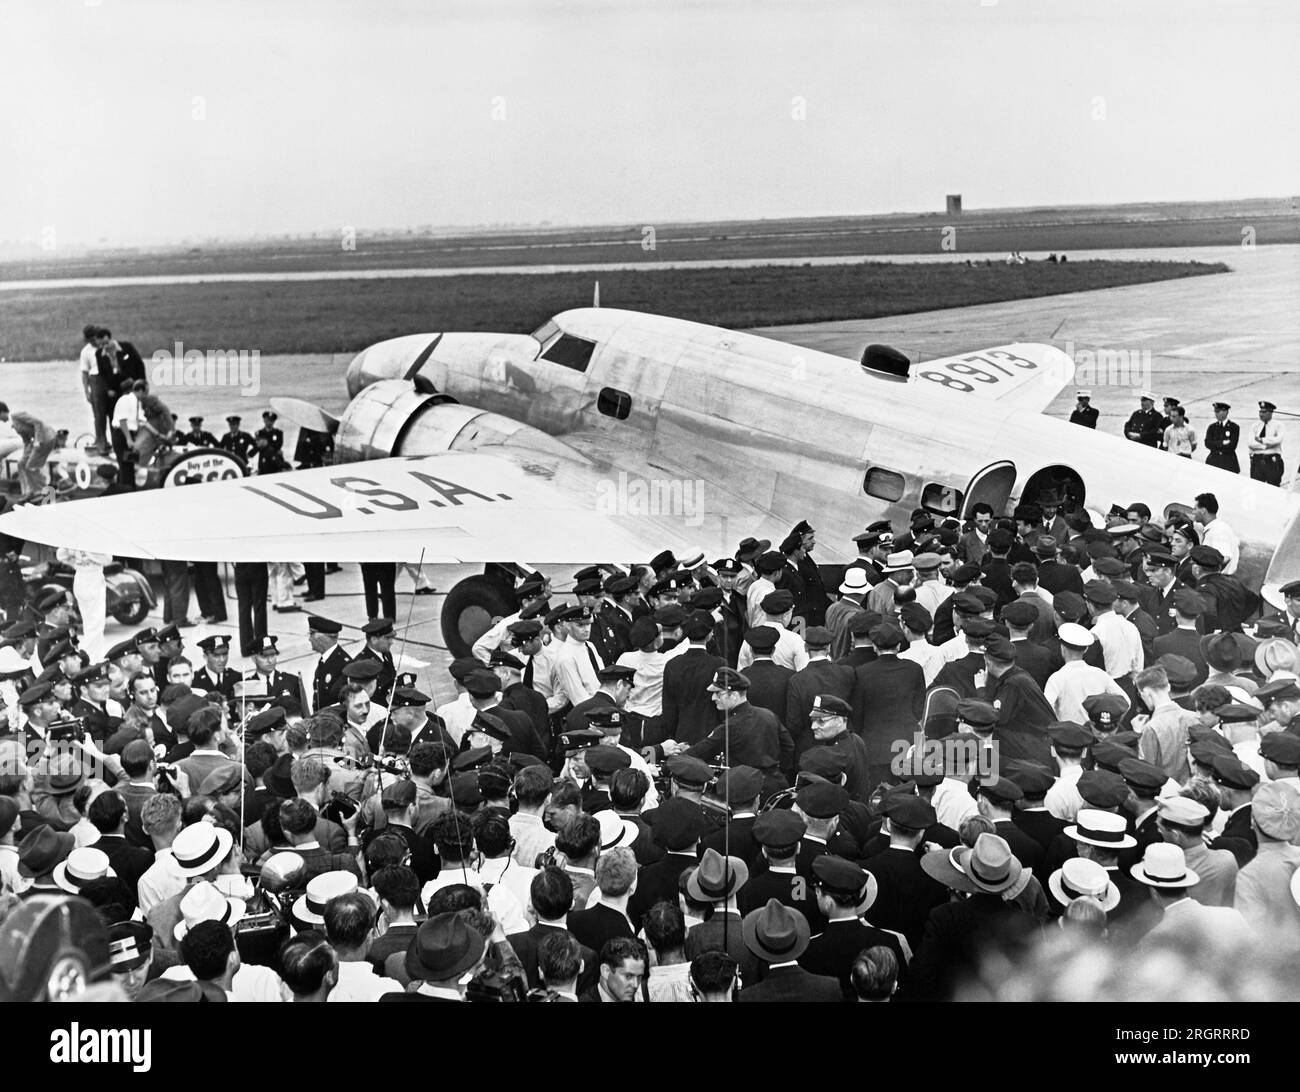 New York, New York:  July 14, 1938 Police surround Howard Hughes' Lockheed 14N Super Electra airplane at Floyd Bennett Airport in Brooklyn when he landed there after flying around the world setting a new record of 3 days, 19 hours and 14 minutes, breaking Wiley Posts's record. It was part of a promotion to attract people to the New York World's Fair. Stock Photo